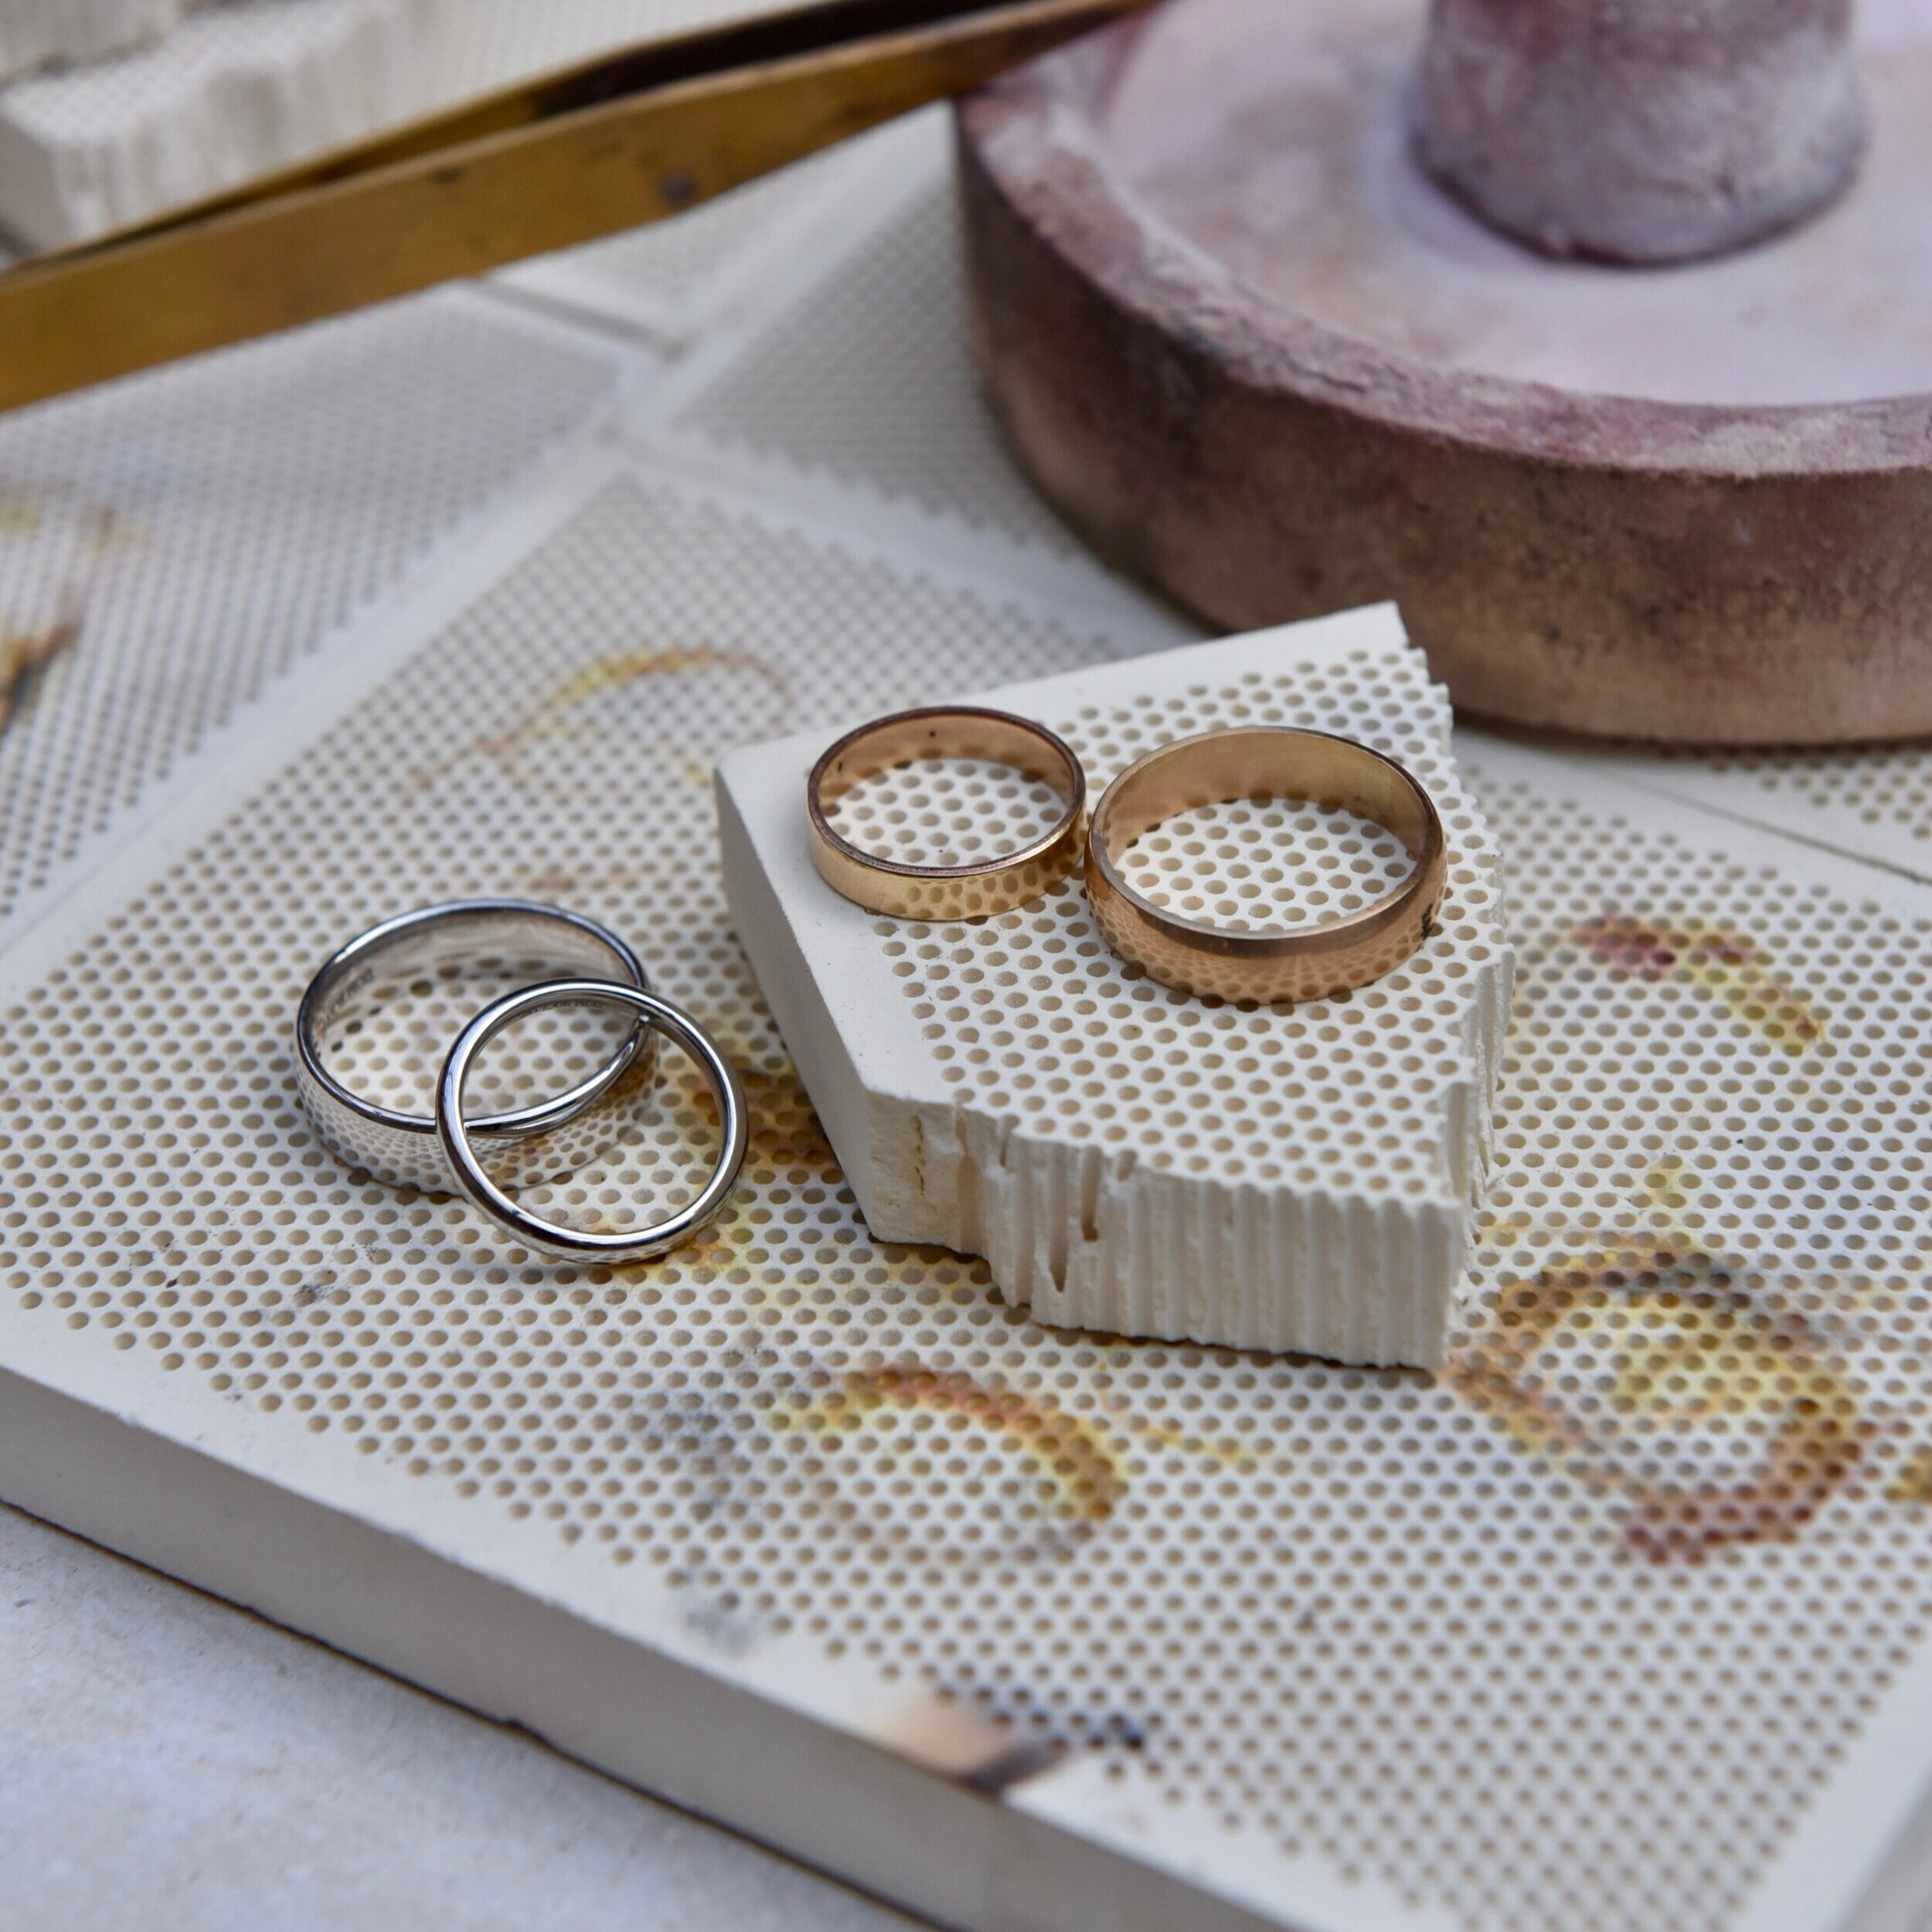 MAKE YOUR OWN WEDDING RINGS